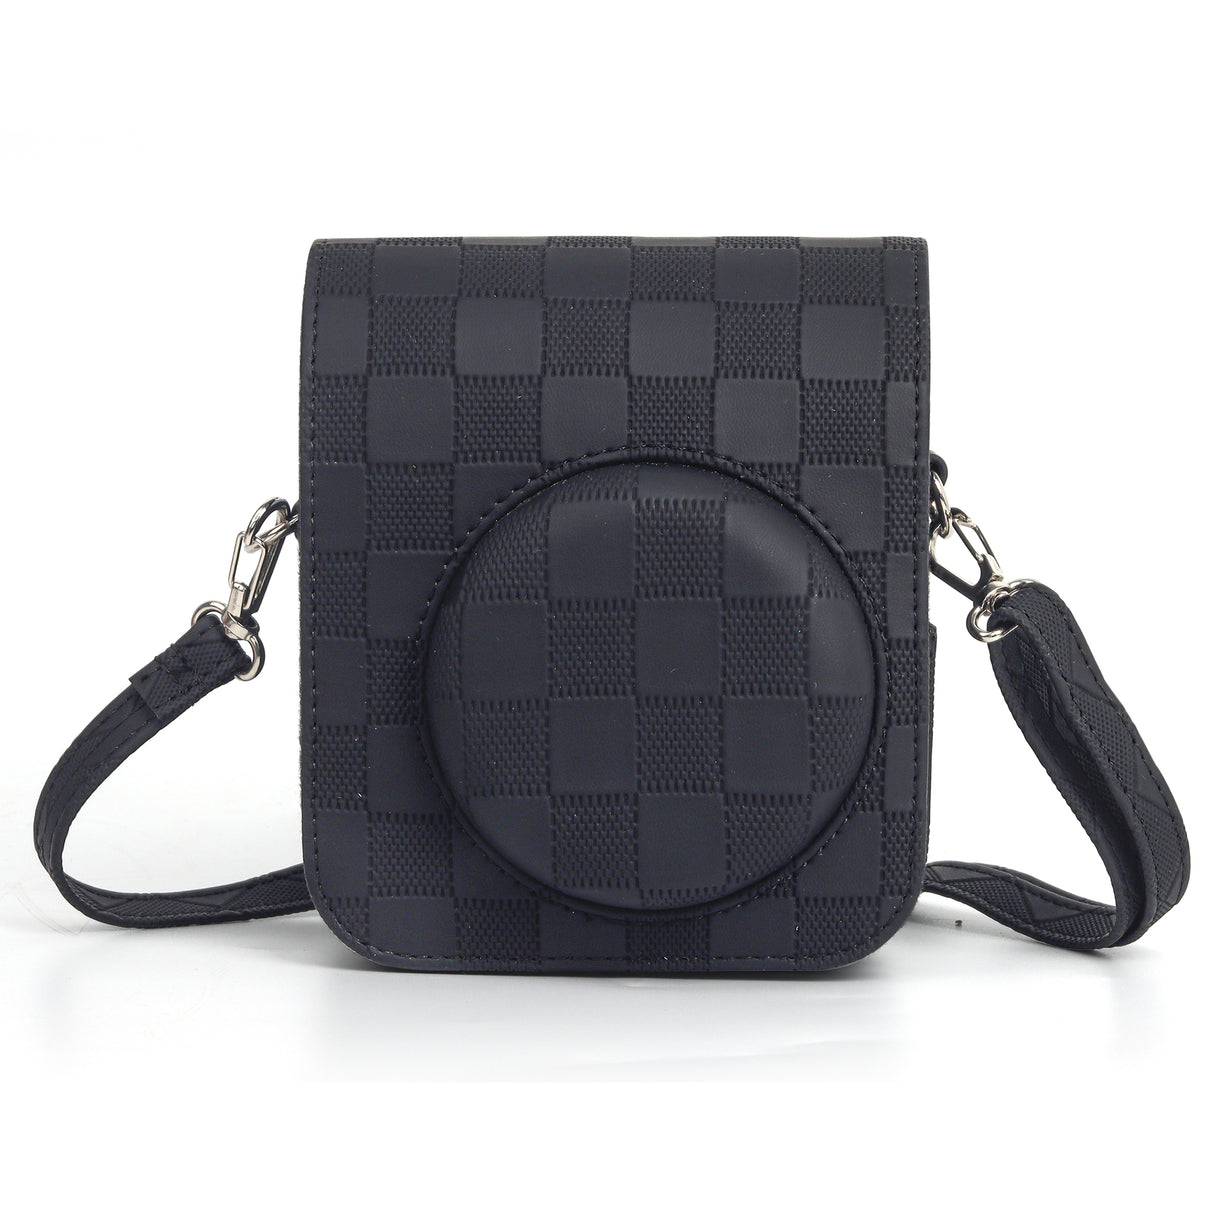 Zikkon Instax Mini 12 Protective Camera Case PU Leather Checkerboard Style Carrying Bag Black